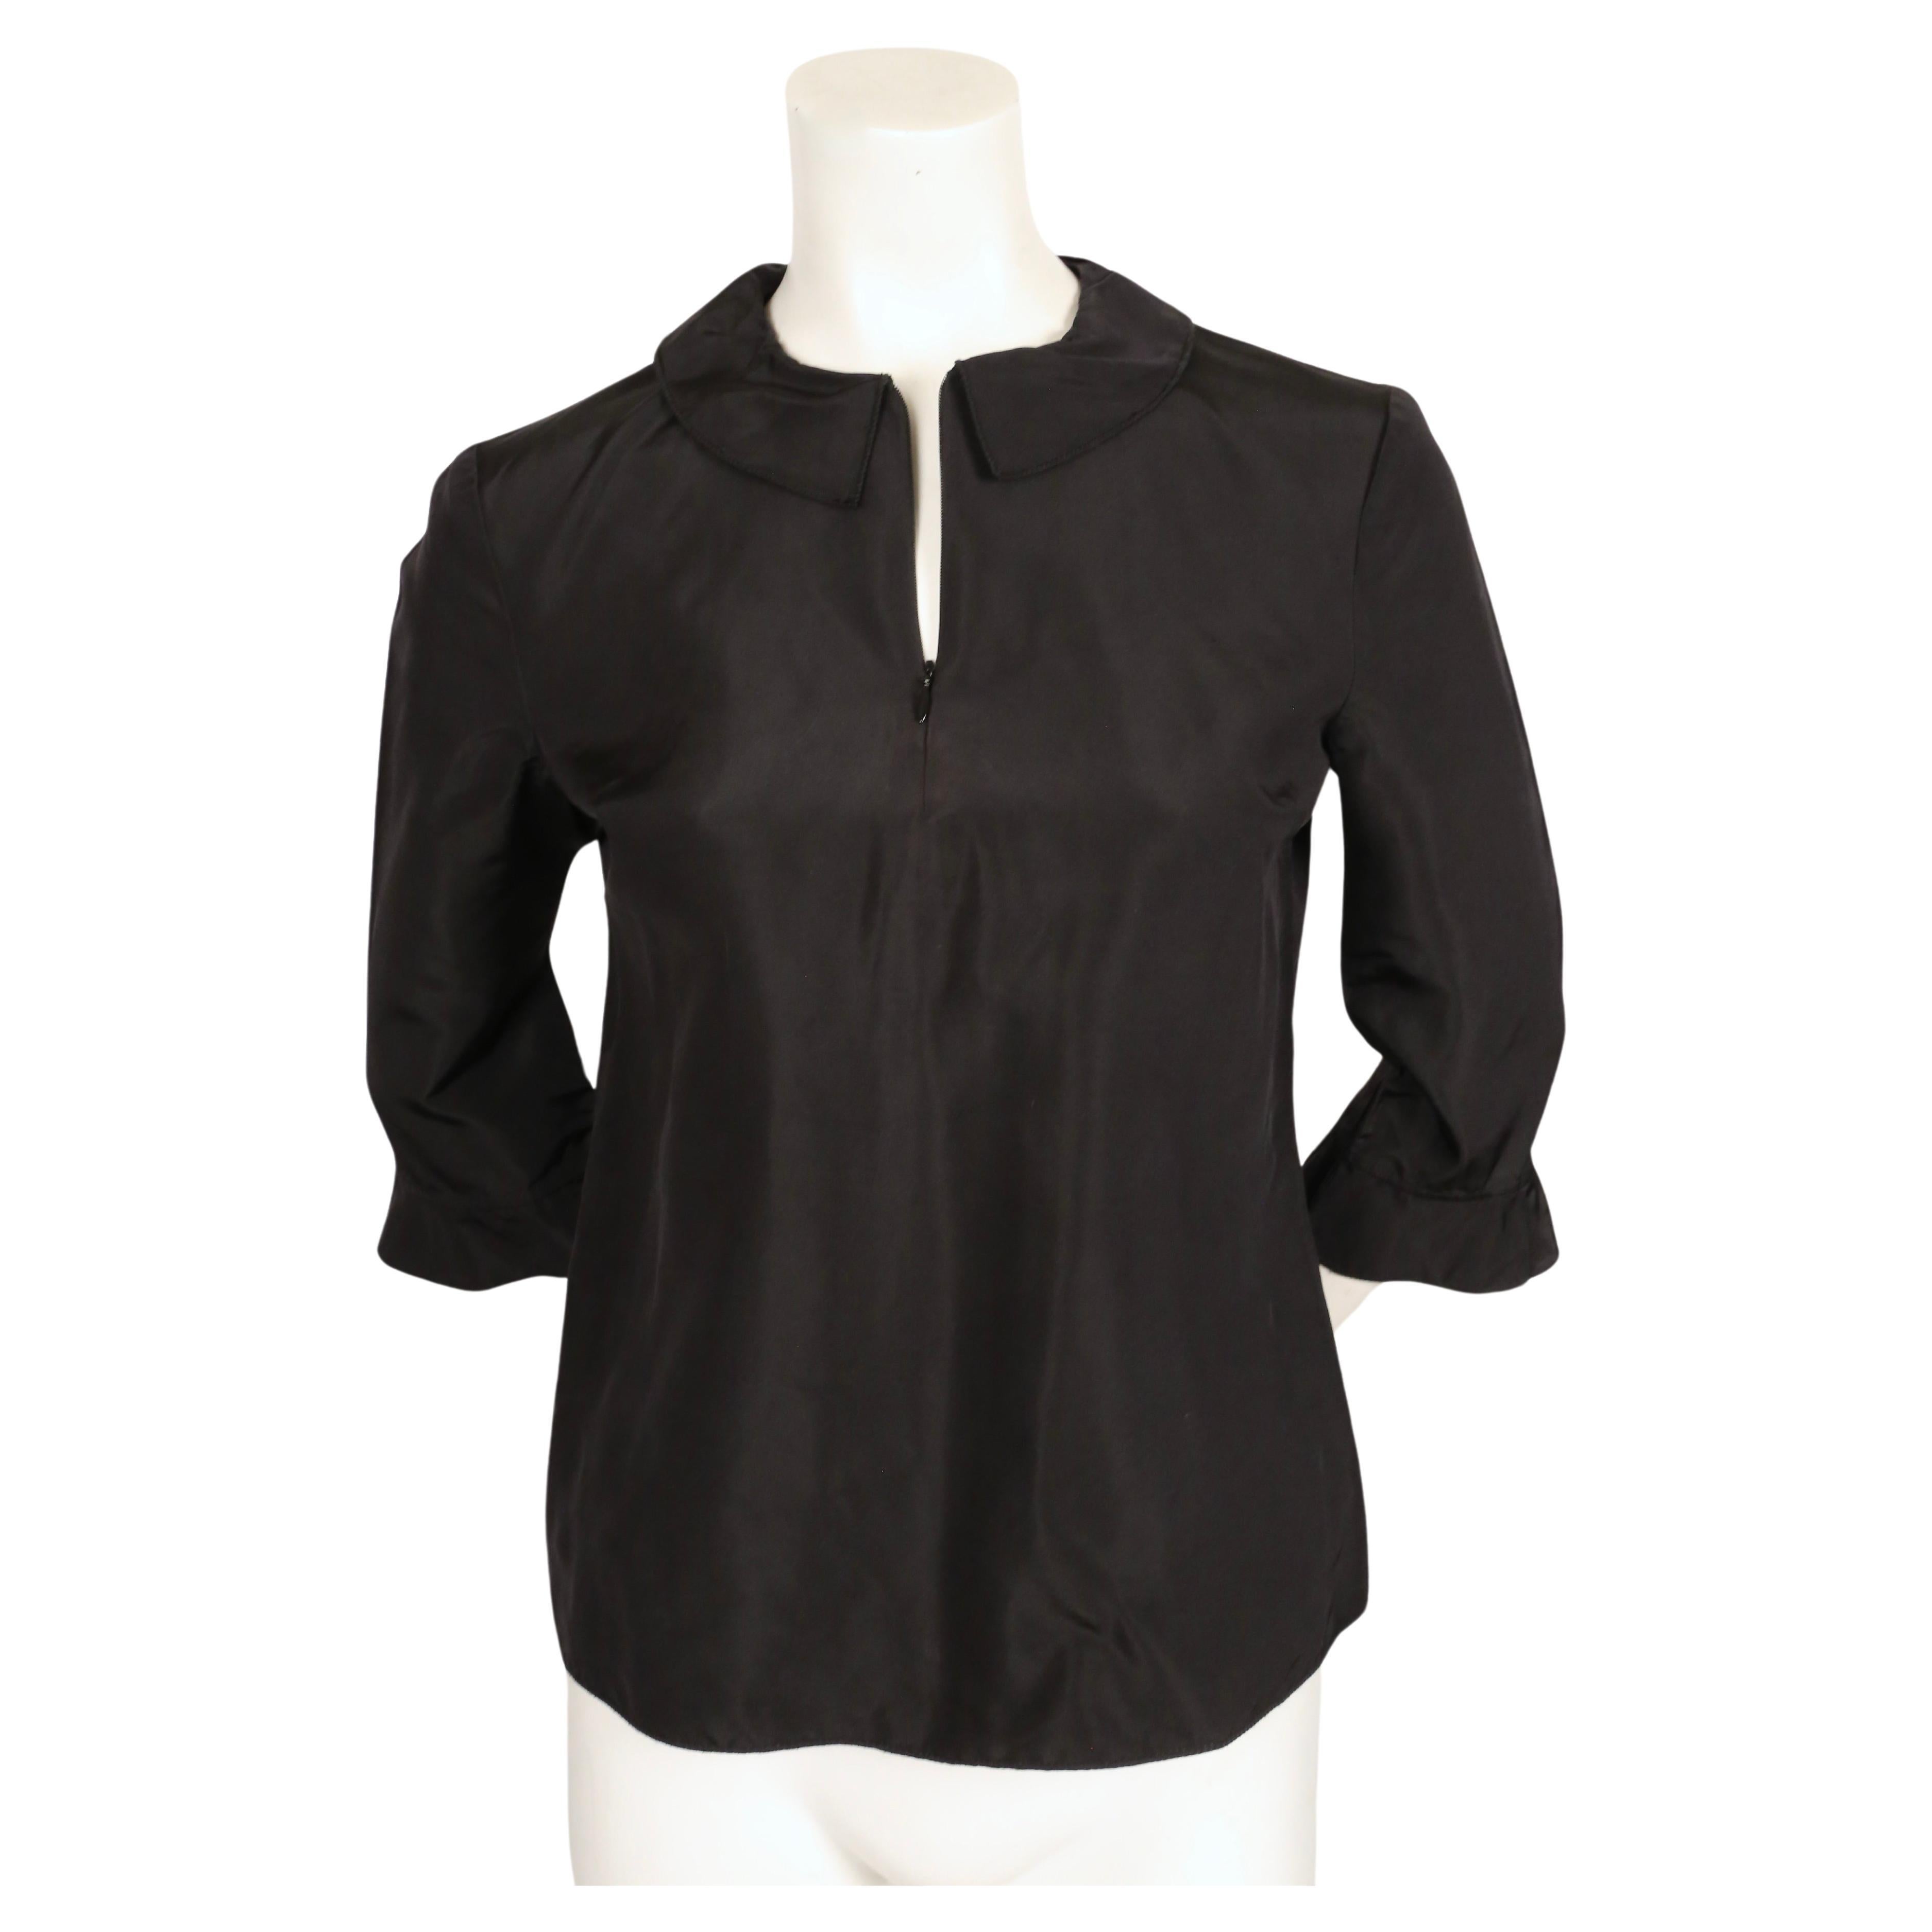 1998 MIU MIU minimalist black runway shirt with ruffles In Good Condition For Sale In San Fransisco, CA